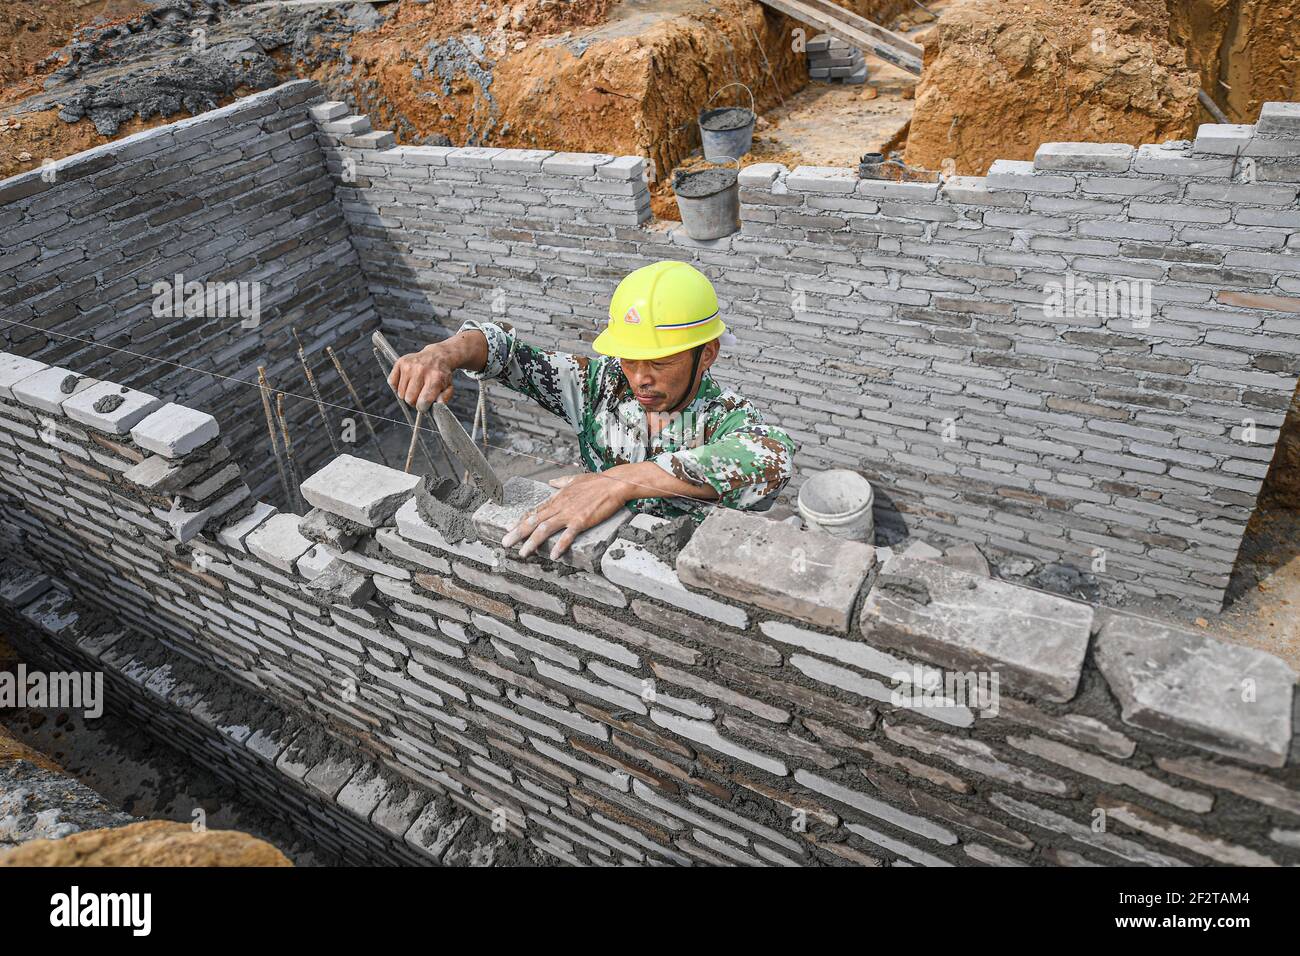 Wenchang, China's Hainan Province. 13th Mar, 2021. A worker works at the construction site of an aerospace supercomputing center project in Wenchang, south China's Hainan Province, March 13, 2021. The project is one of the key parts of the construction of the Hainan Free Trade Port. Credit: Pu Xiaoxu/Xinhua/Alamy Live News Stock Photo